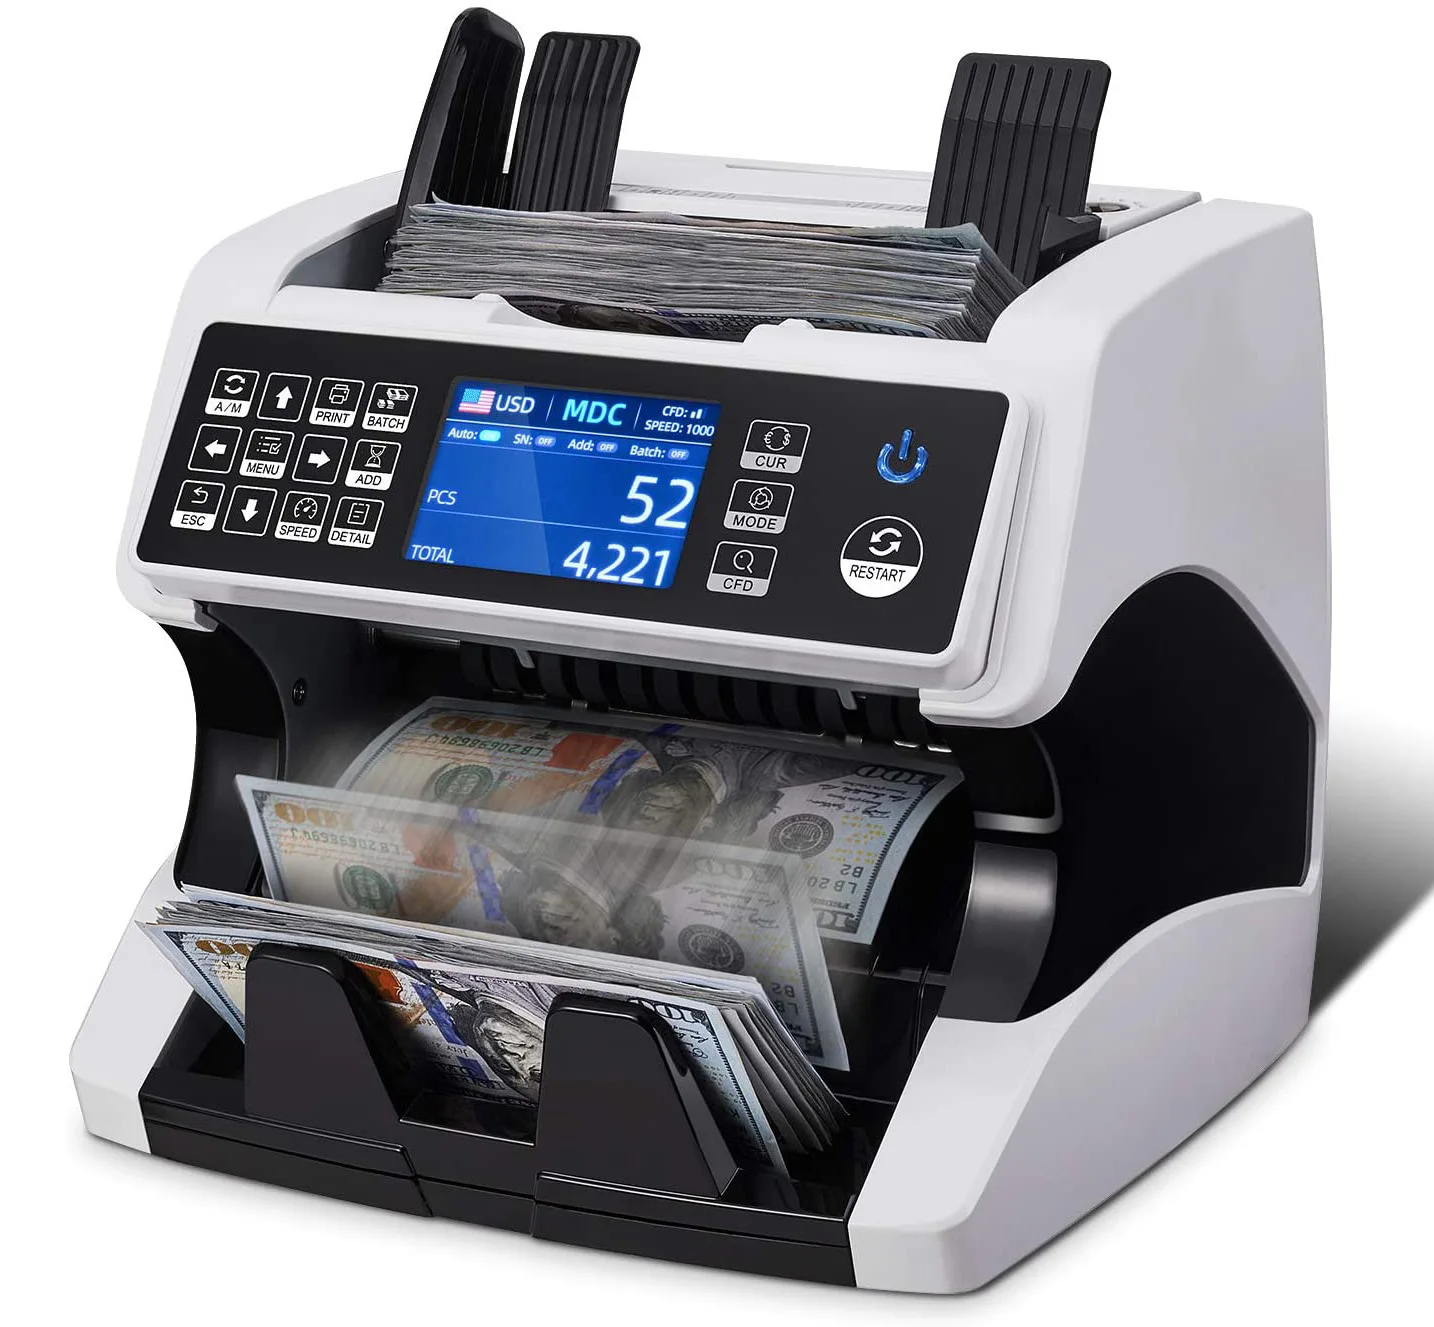 AL 920 ECB tested 2 CIS Mixed value money counter with serial number printing